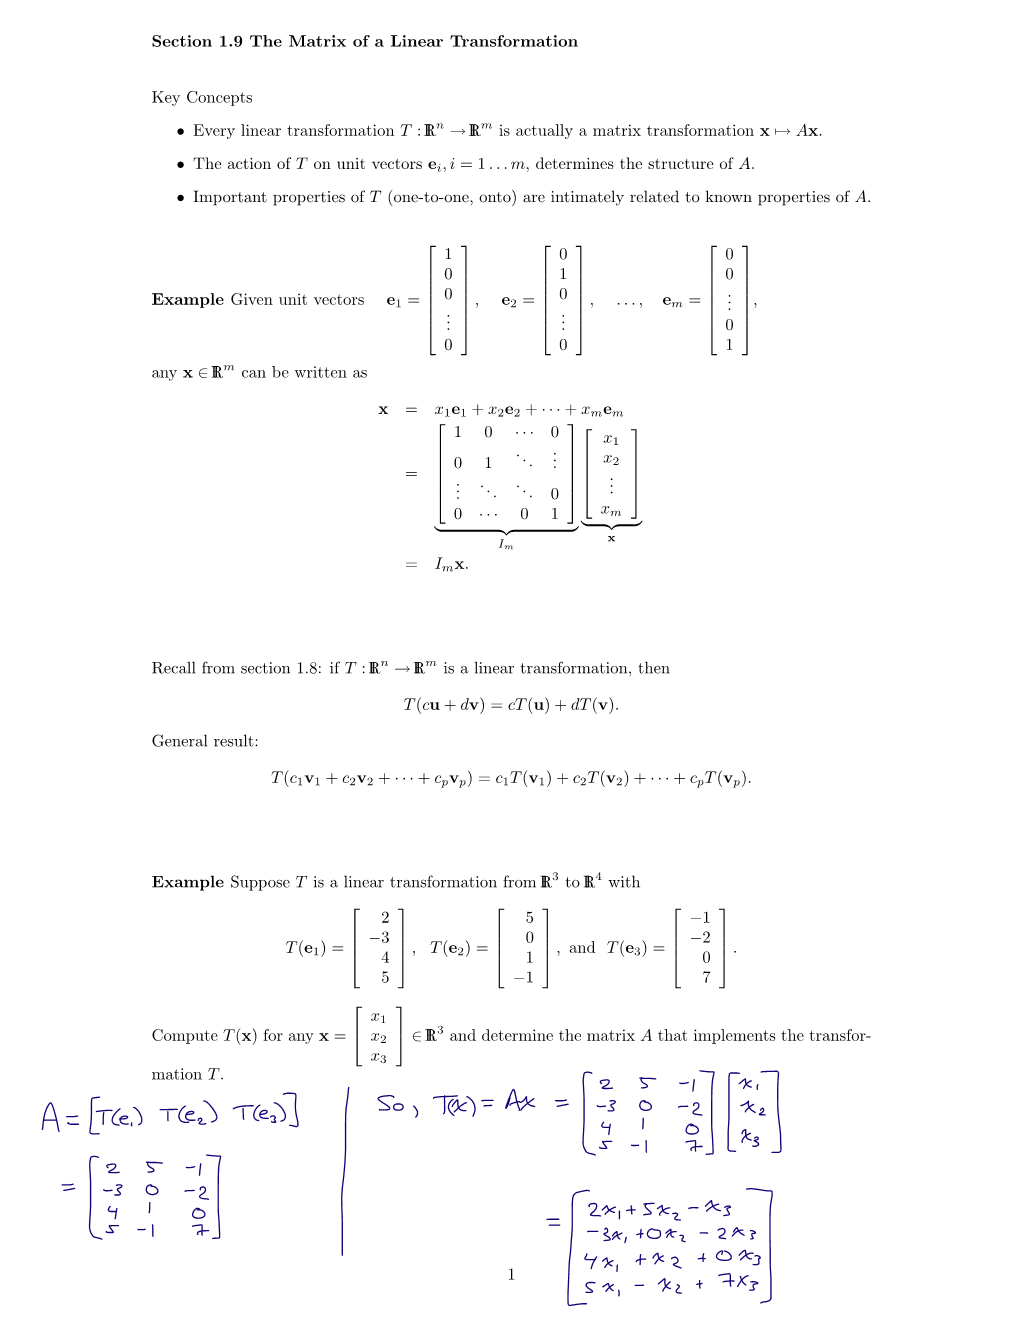 Section 1.9 the Matrix of a Linear Transformation